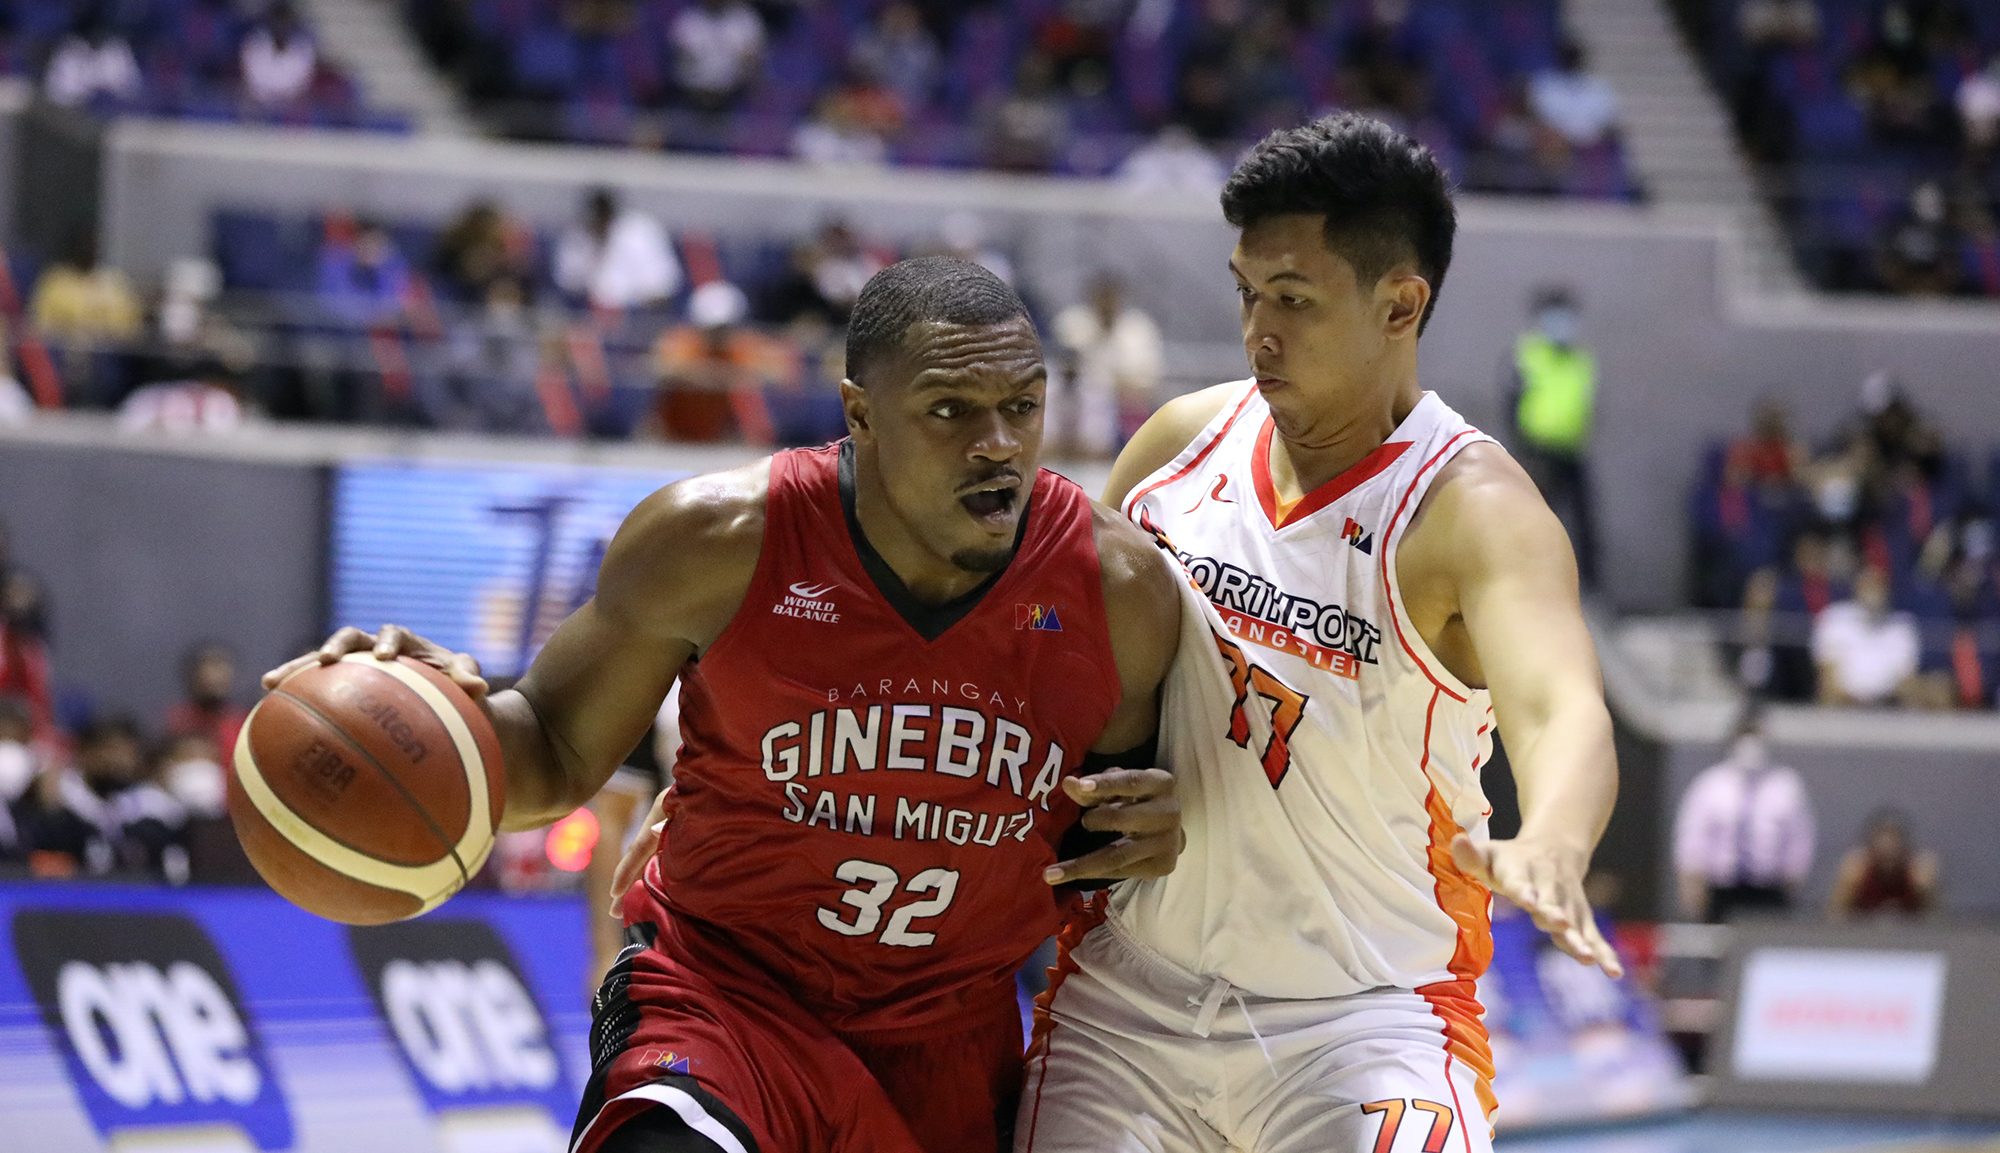 Ginebra cruises to 26-point rout, sends NorthPort to 0-4 start